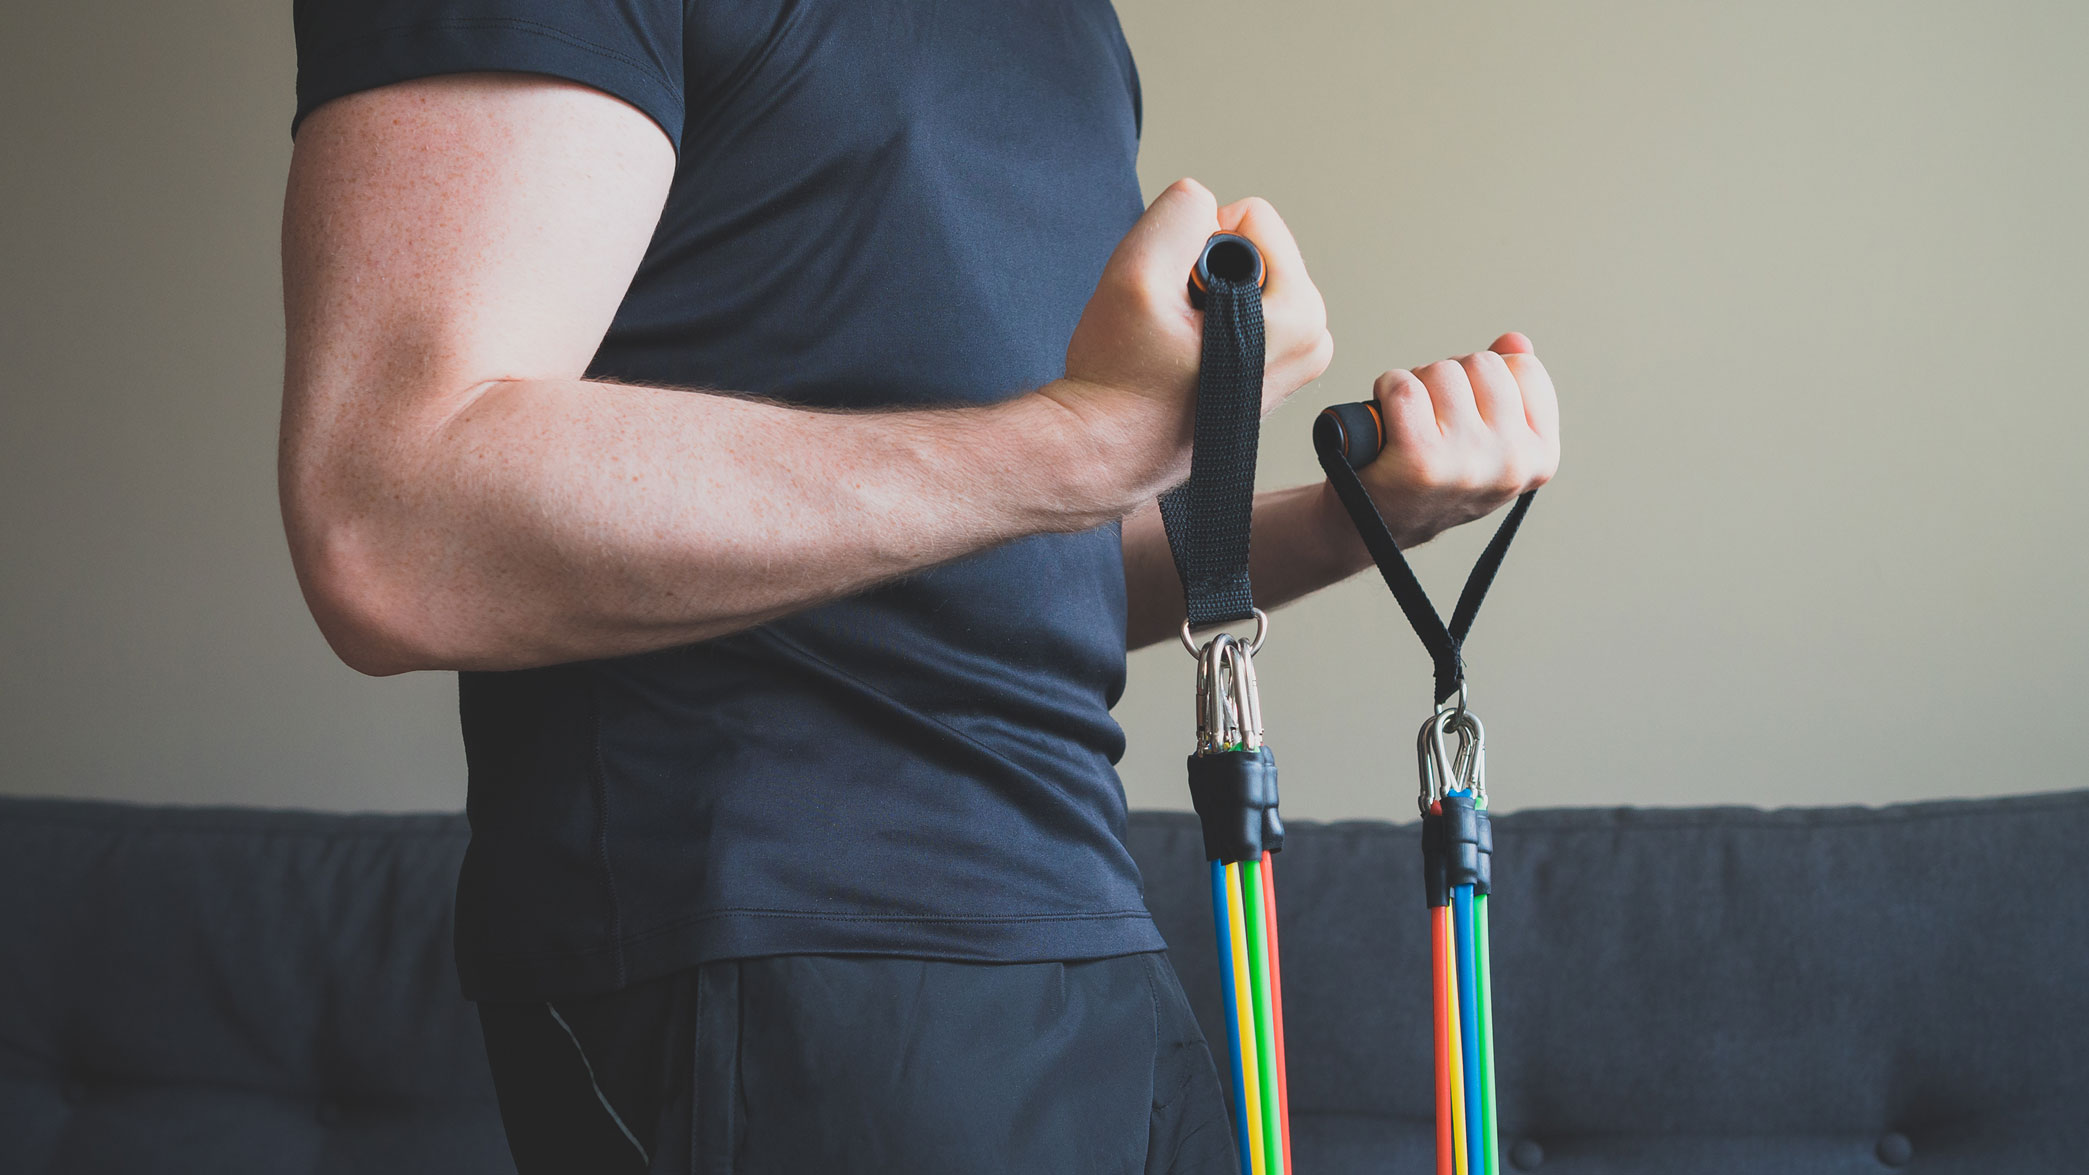 Every fitness beginner needs a resistance bands set for big gains at a tiny  cost